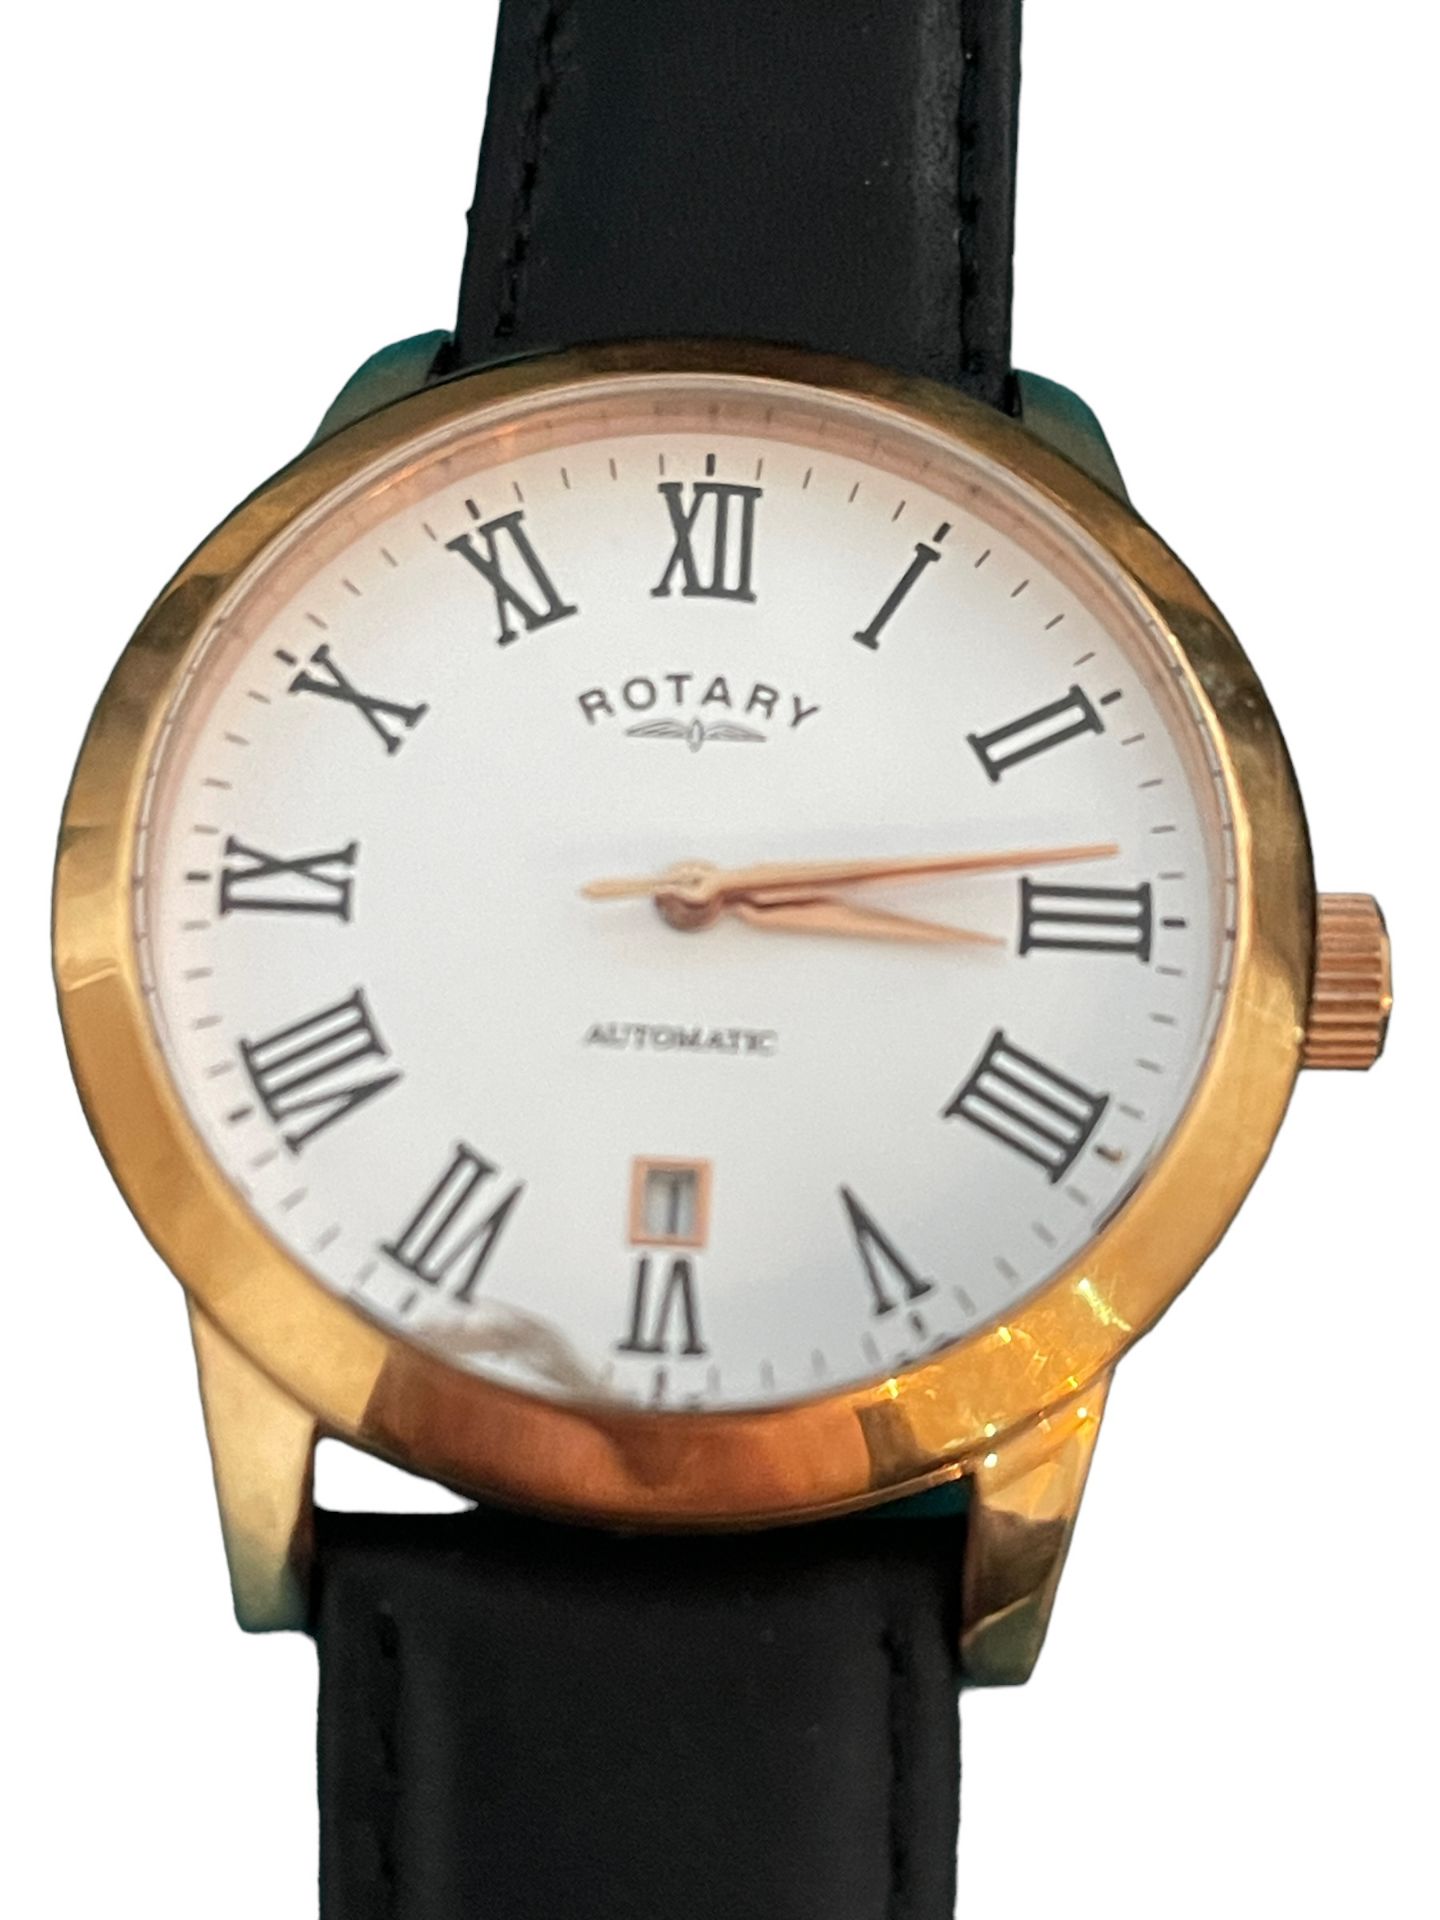 ROTARY WATCH GOLD PLATED AUTOMATIC RETURN OR X DEMO - Image 3 of 4